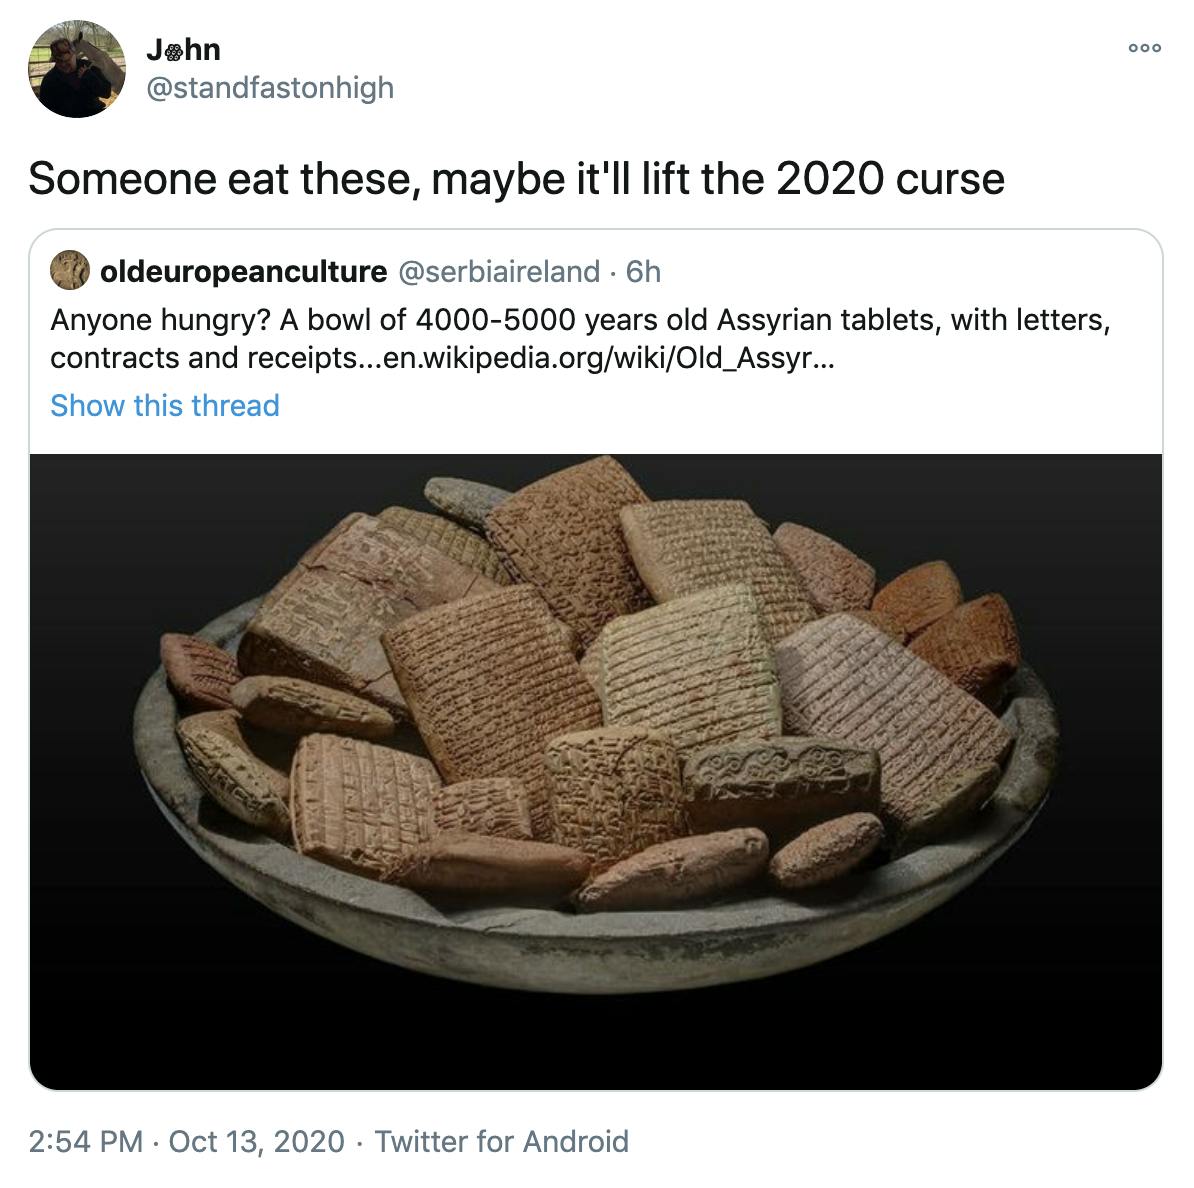 'Someone eat these, maybe it'll lift the 2020 curse' embed of original tweet